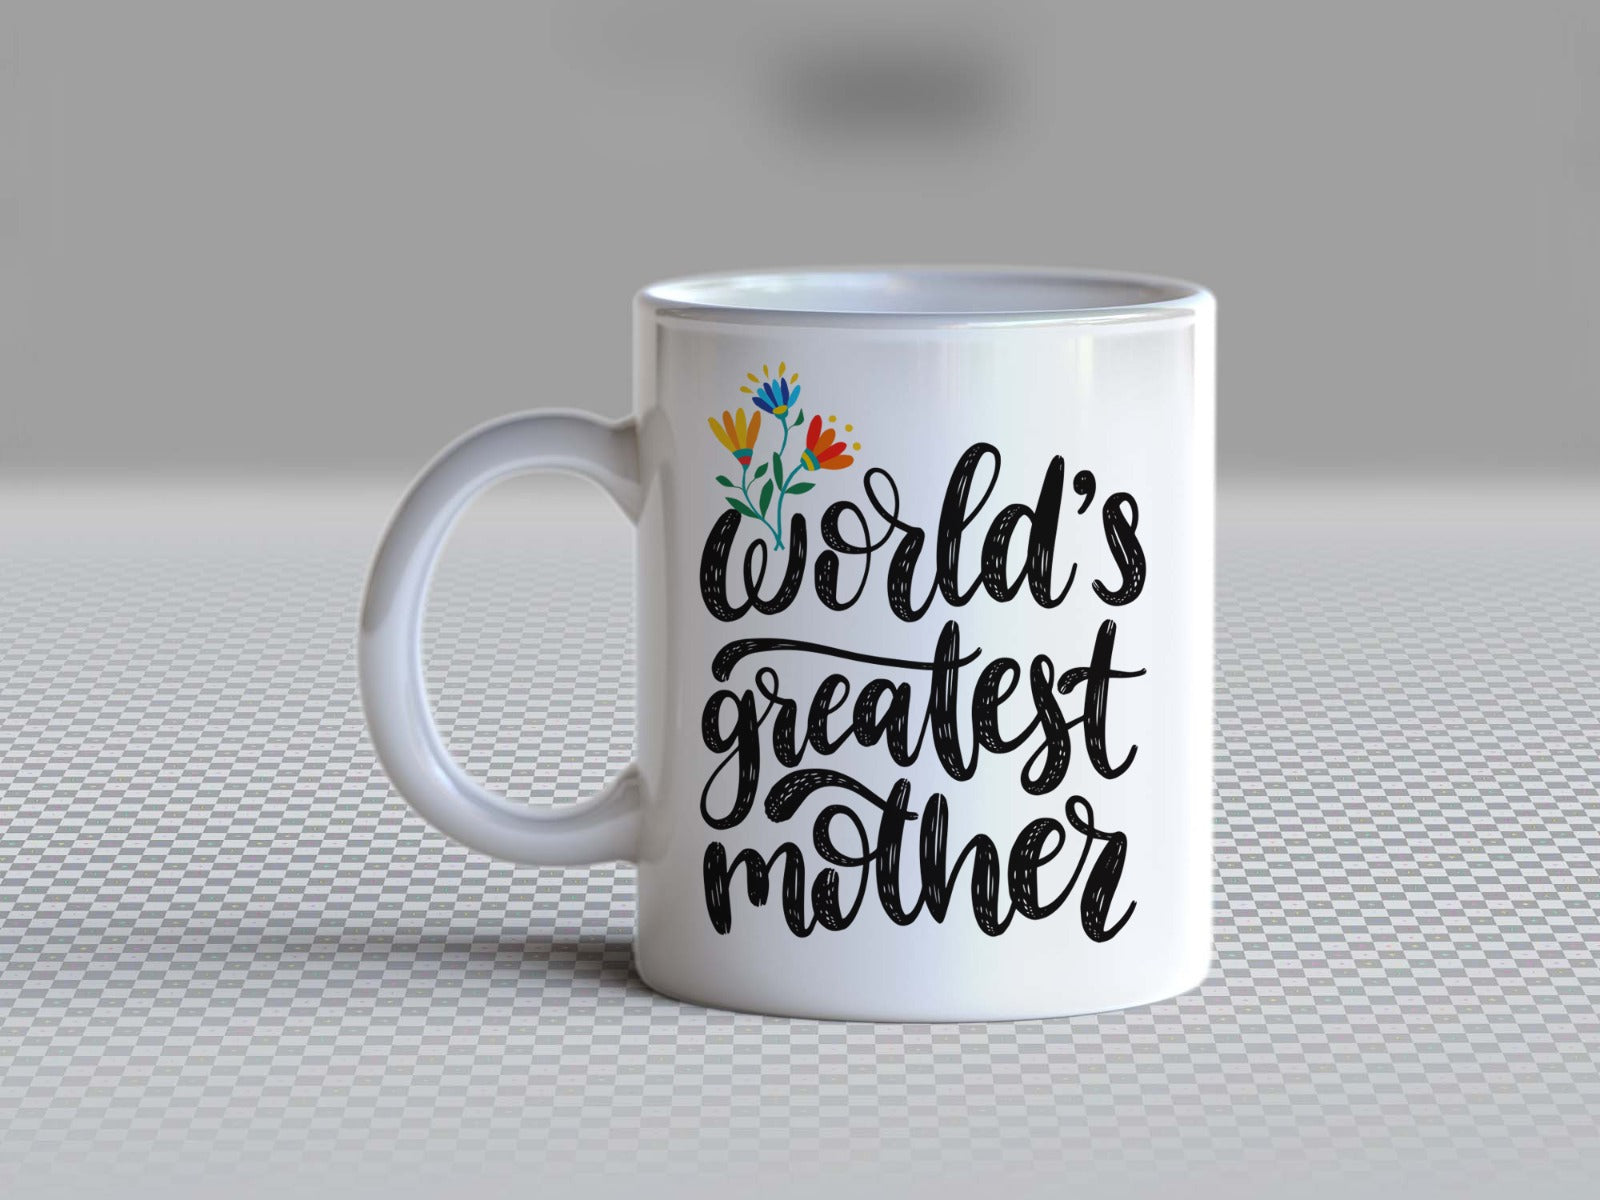 World's Greatest mother - MDP 182